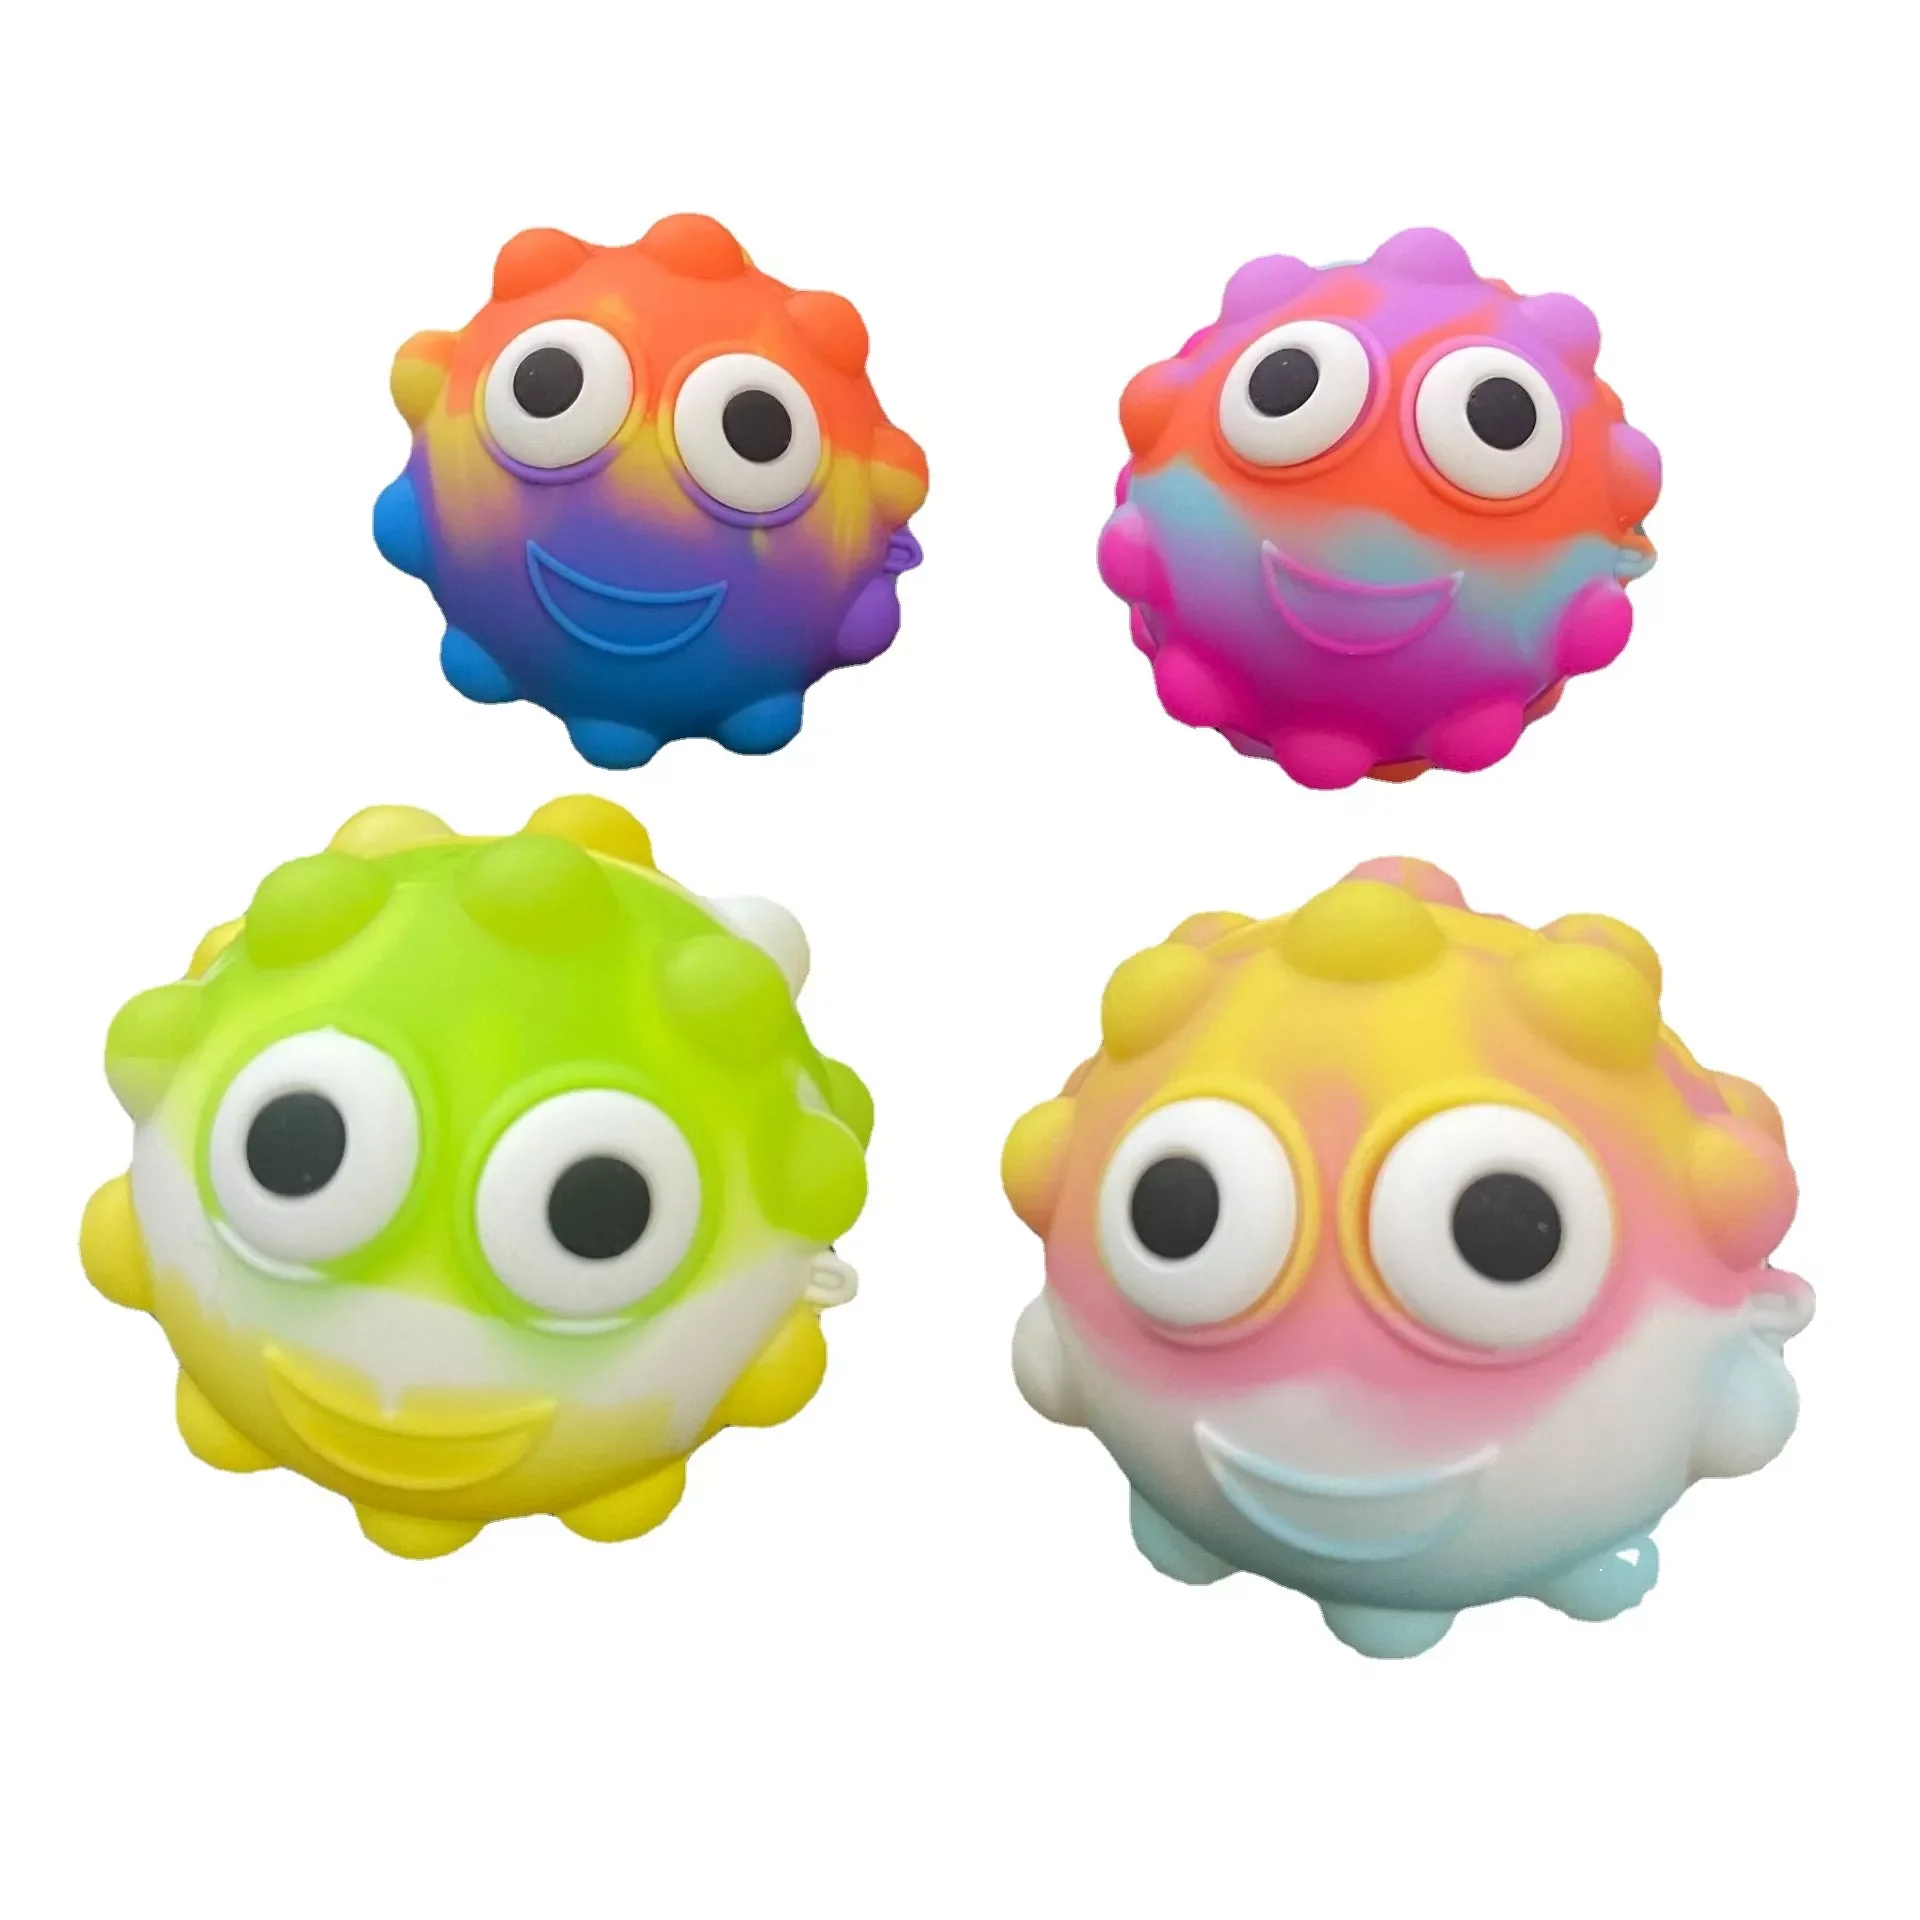 Silicone Kneading Ball 3D Decompression Bubble Music Grip Ball Fingertips Decompression Vent Bubble Toy